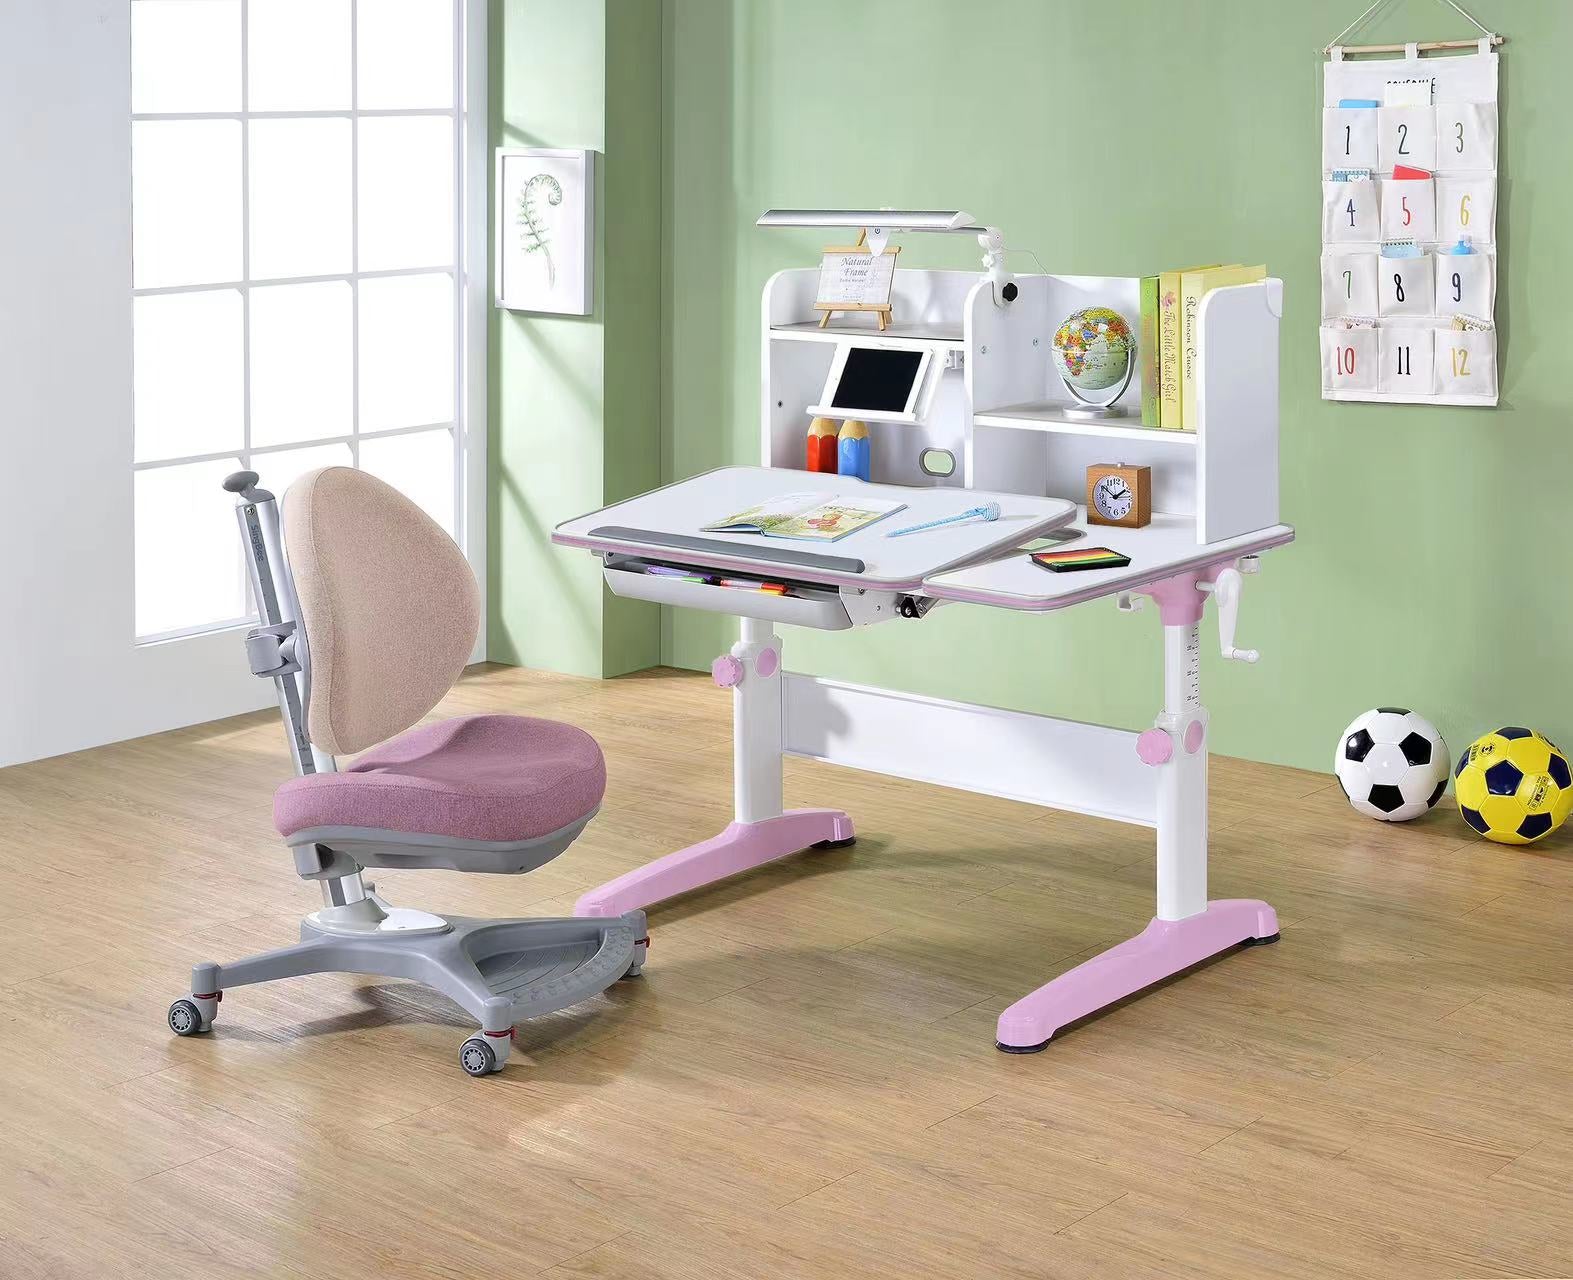 Childrens study desk pink -learning stations that are height-adjustable, tilt-adjustable, and grow with the child – simply ergonomic